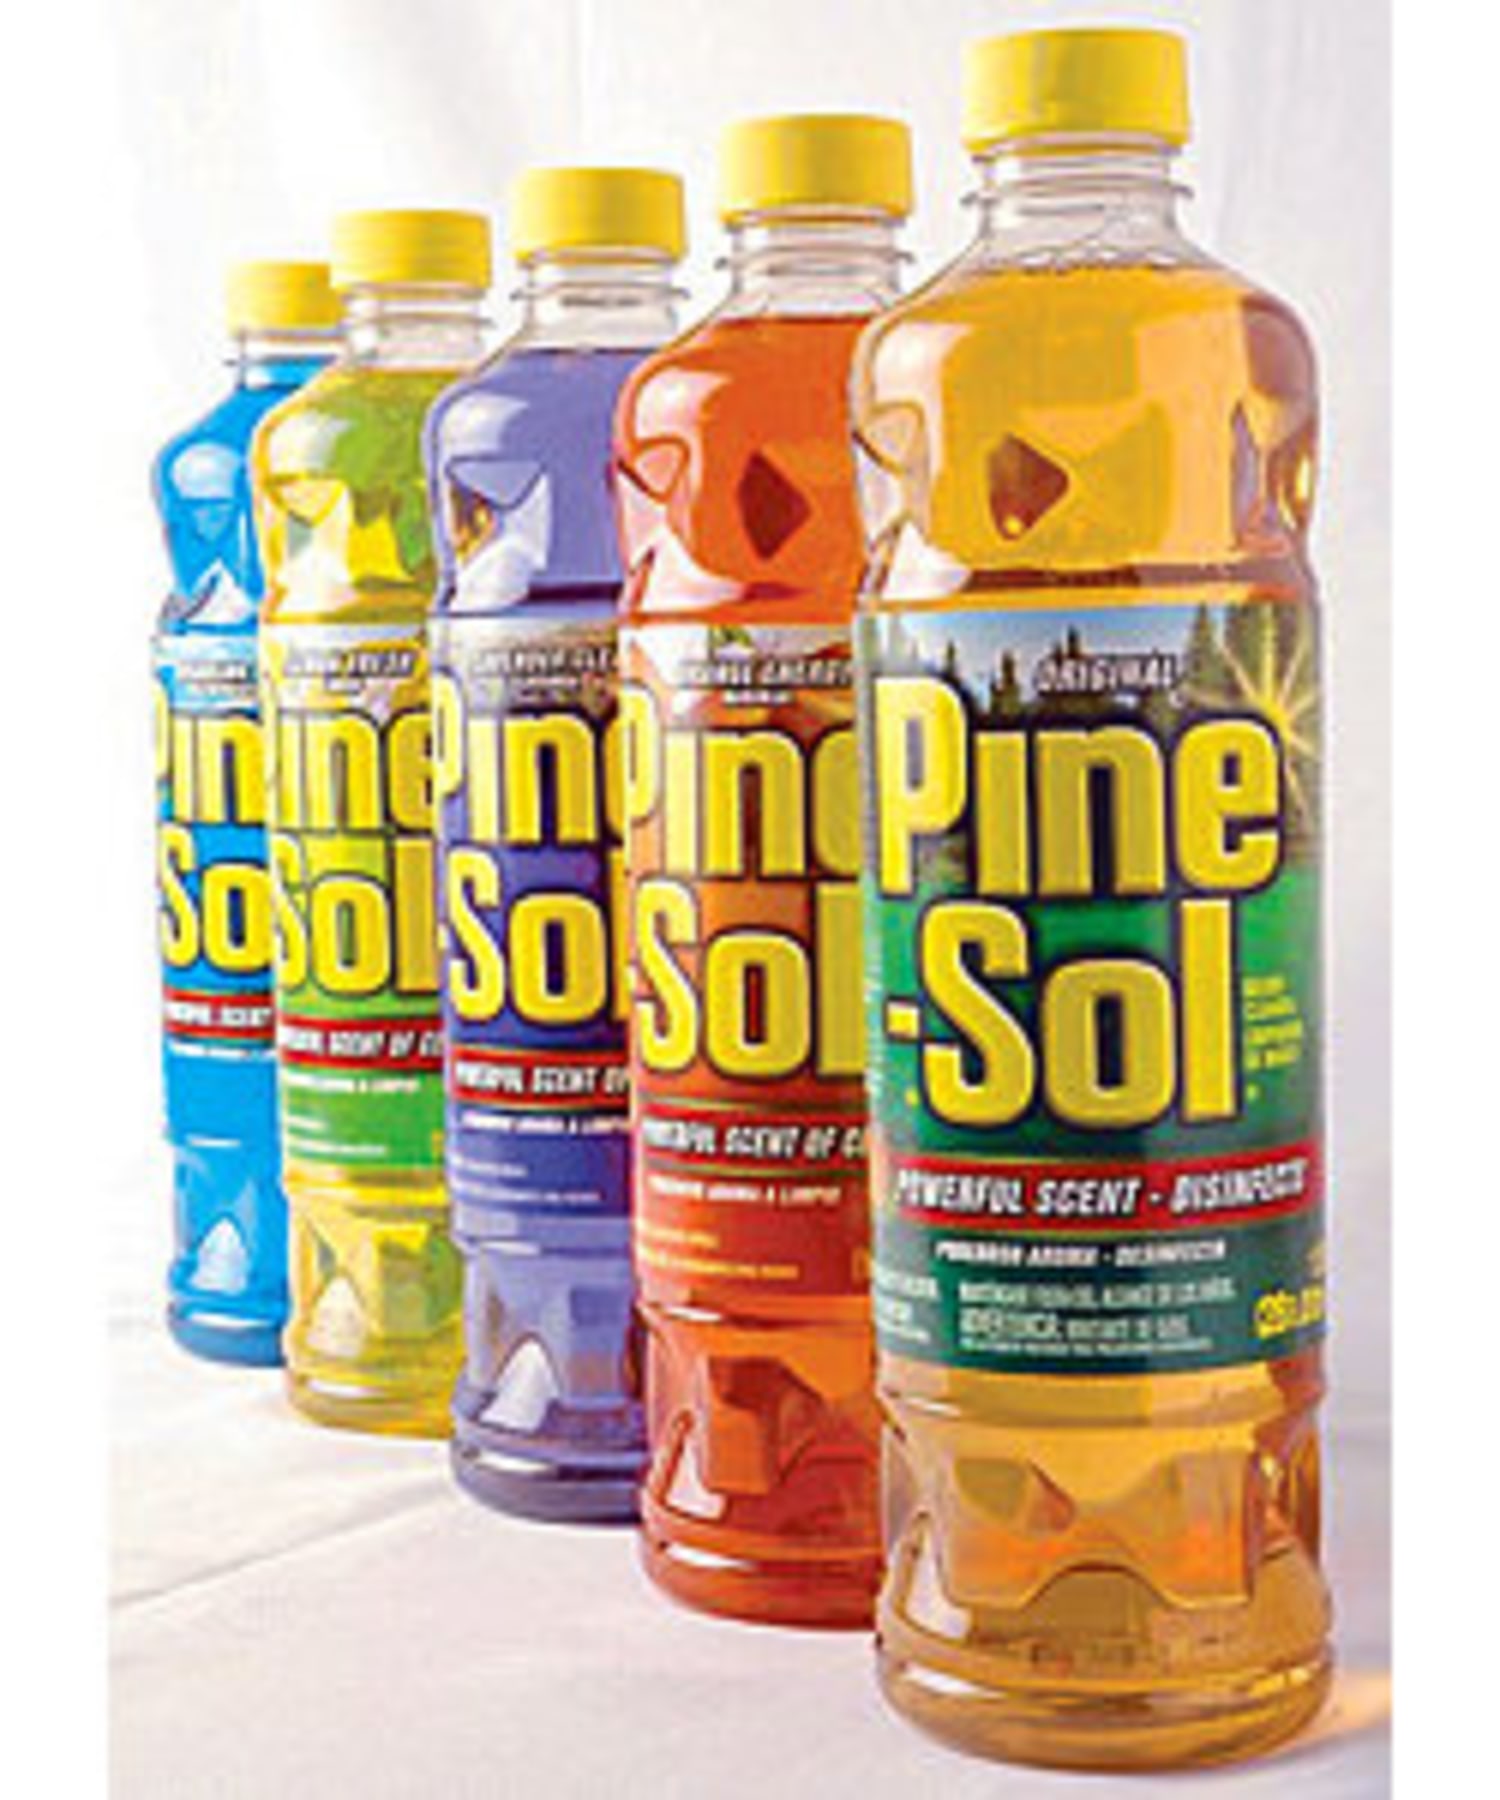 Does Pine-Sol contain pine? Now you'll know